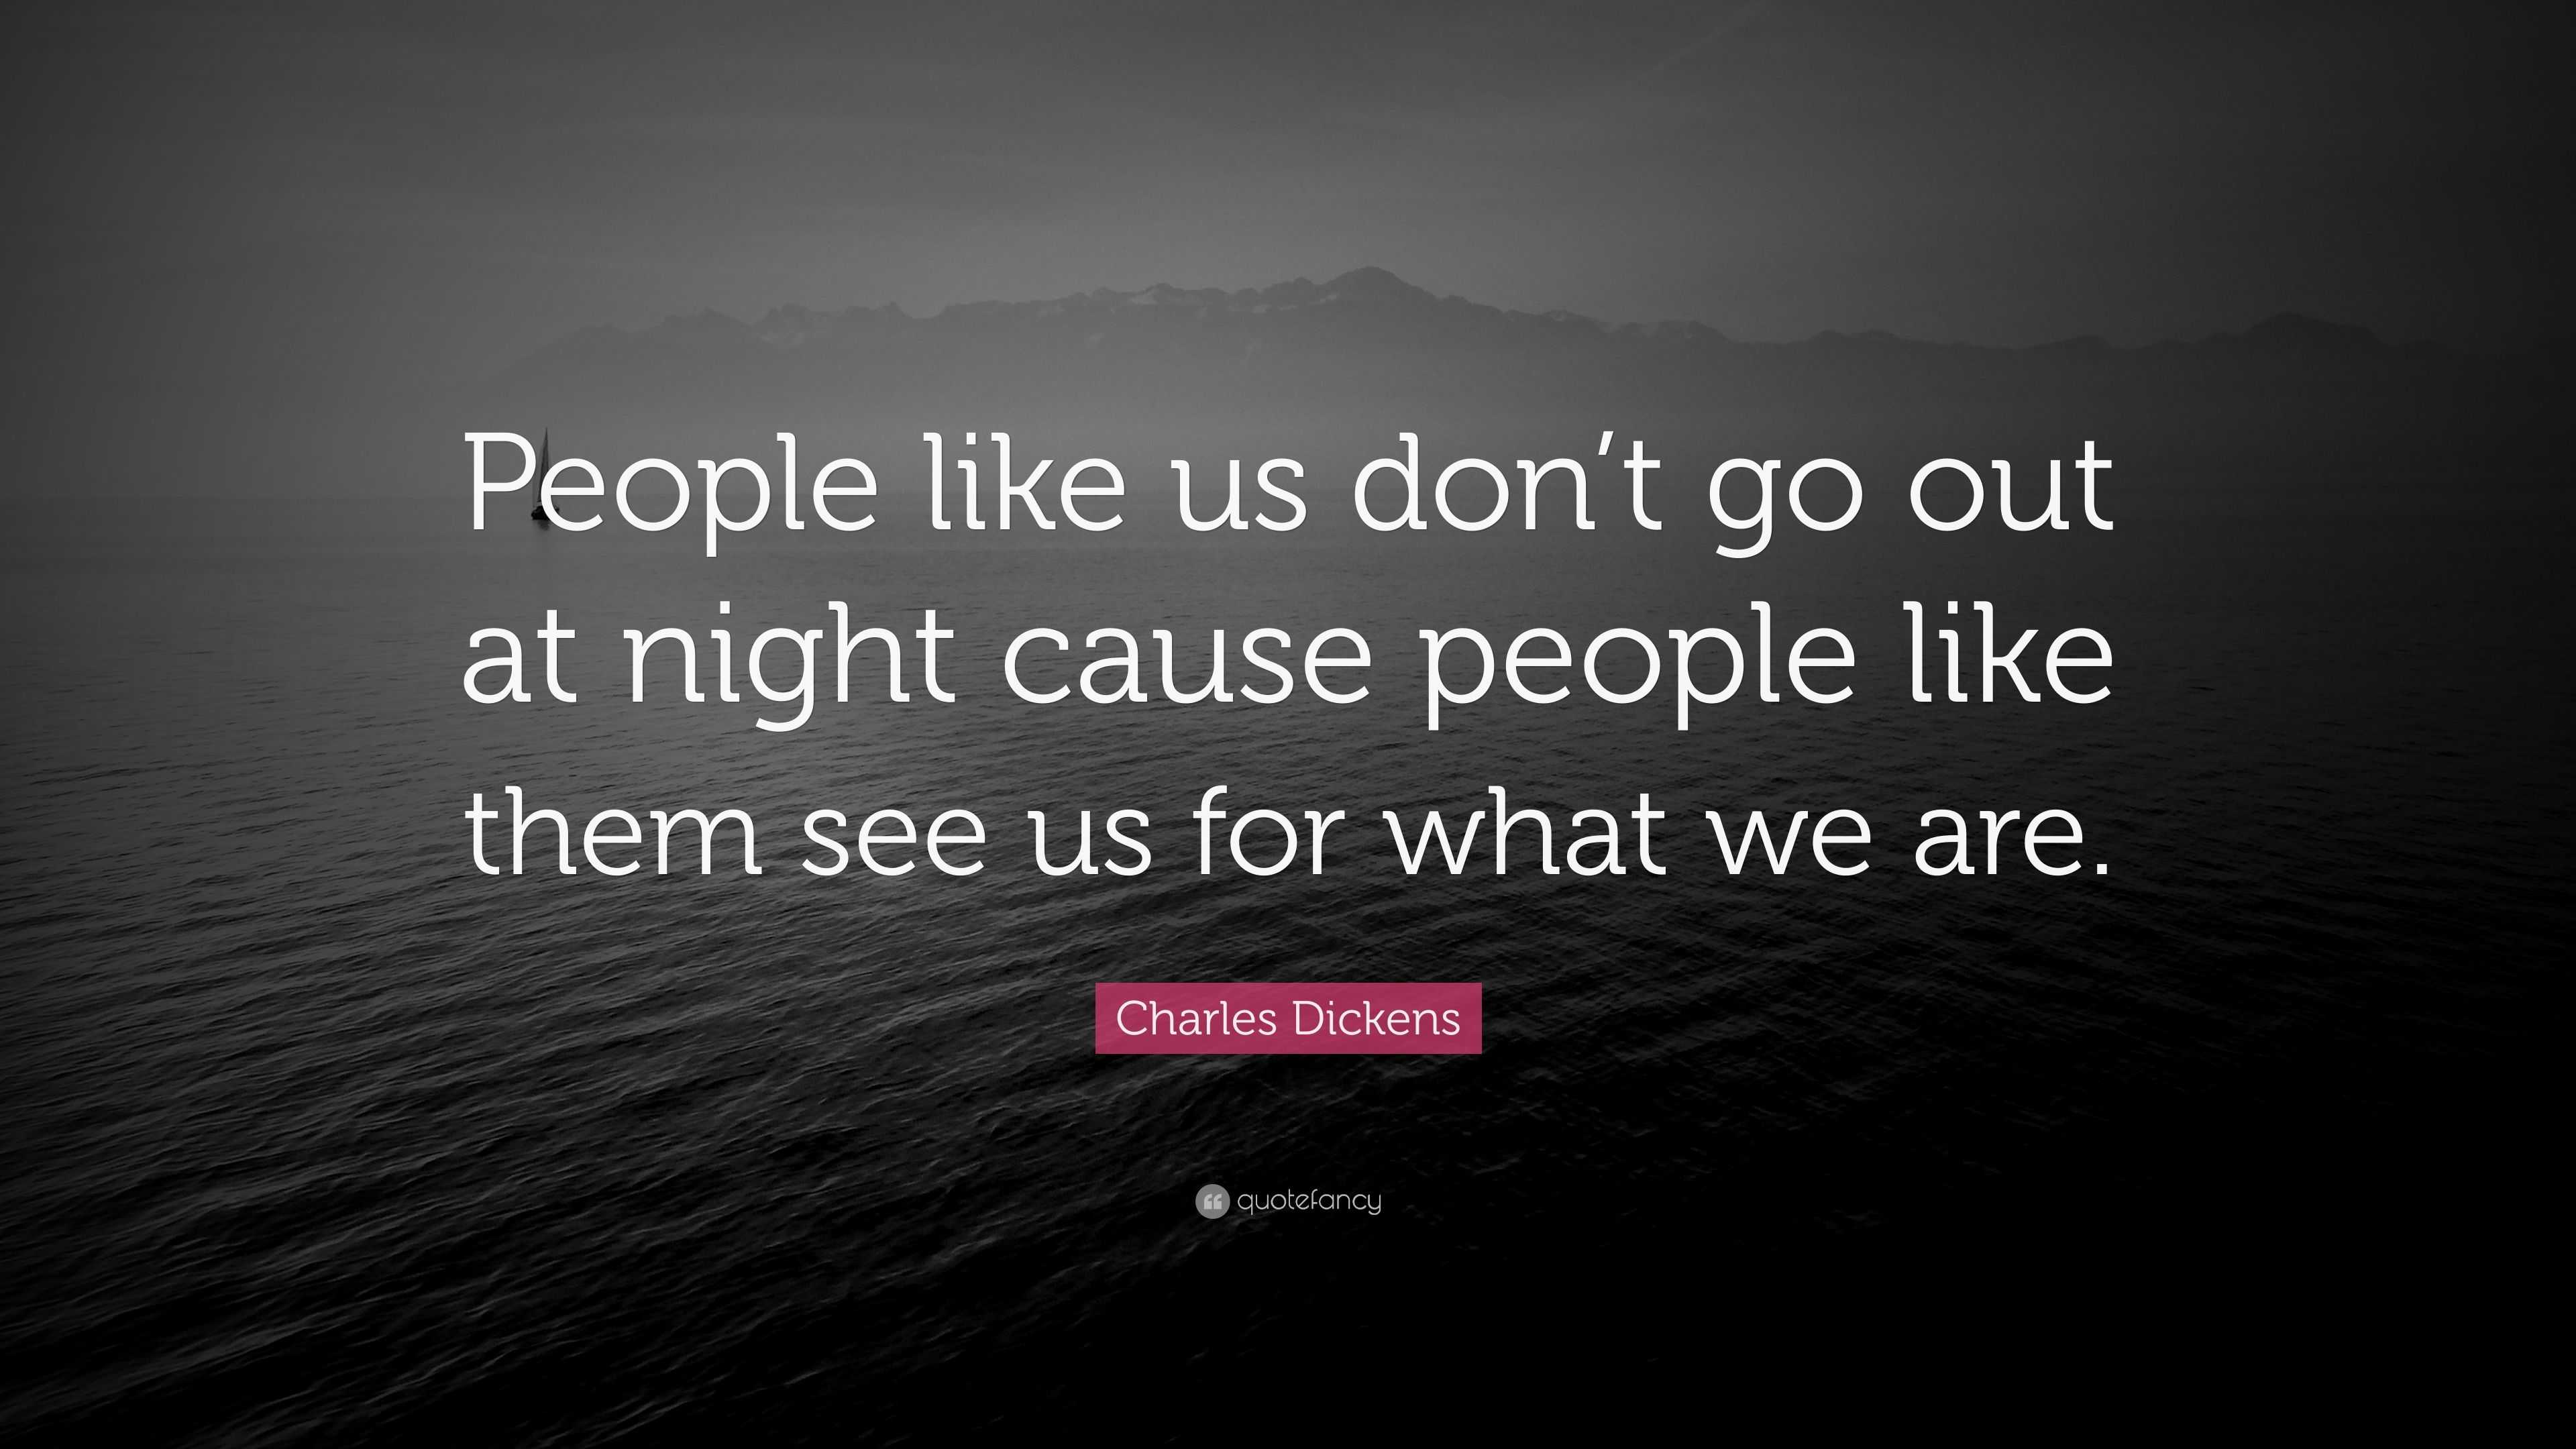 Charles Dickens Quote: “People like us don’t go out at night cause ...